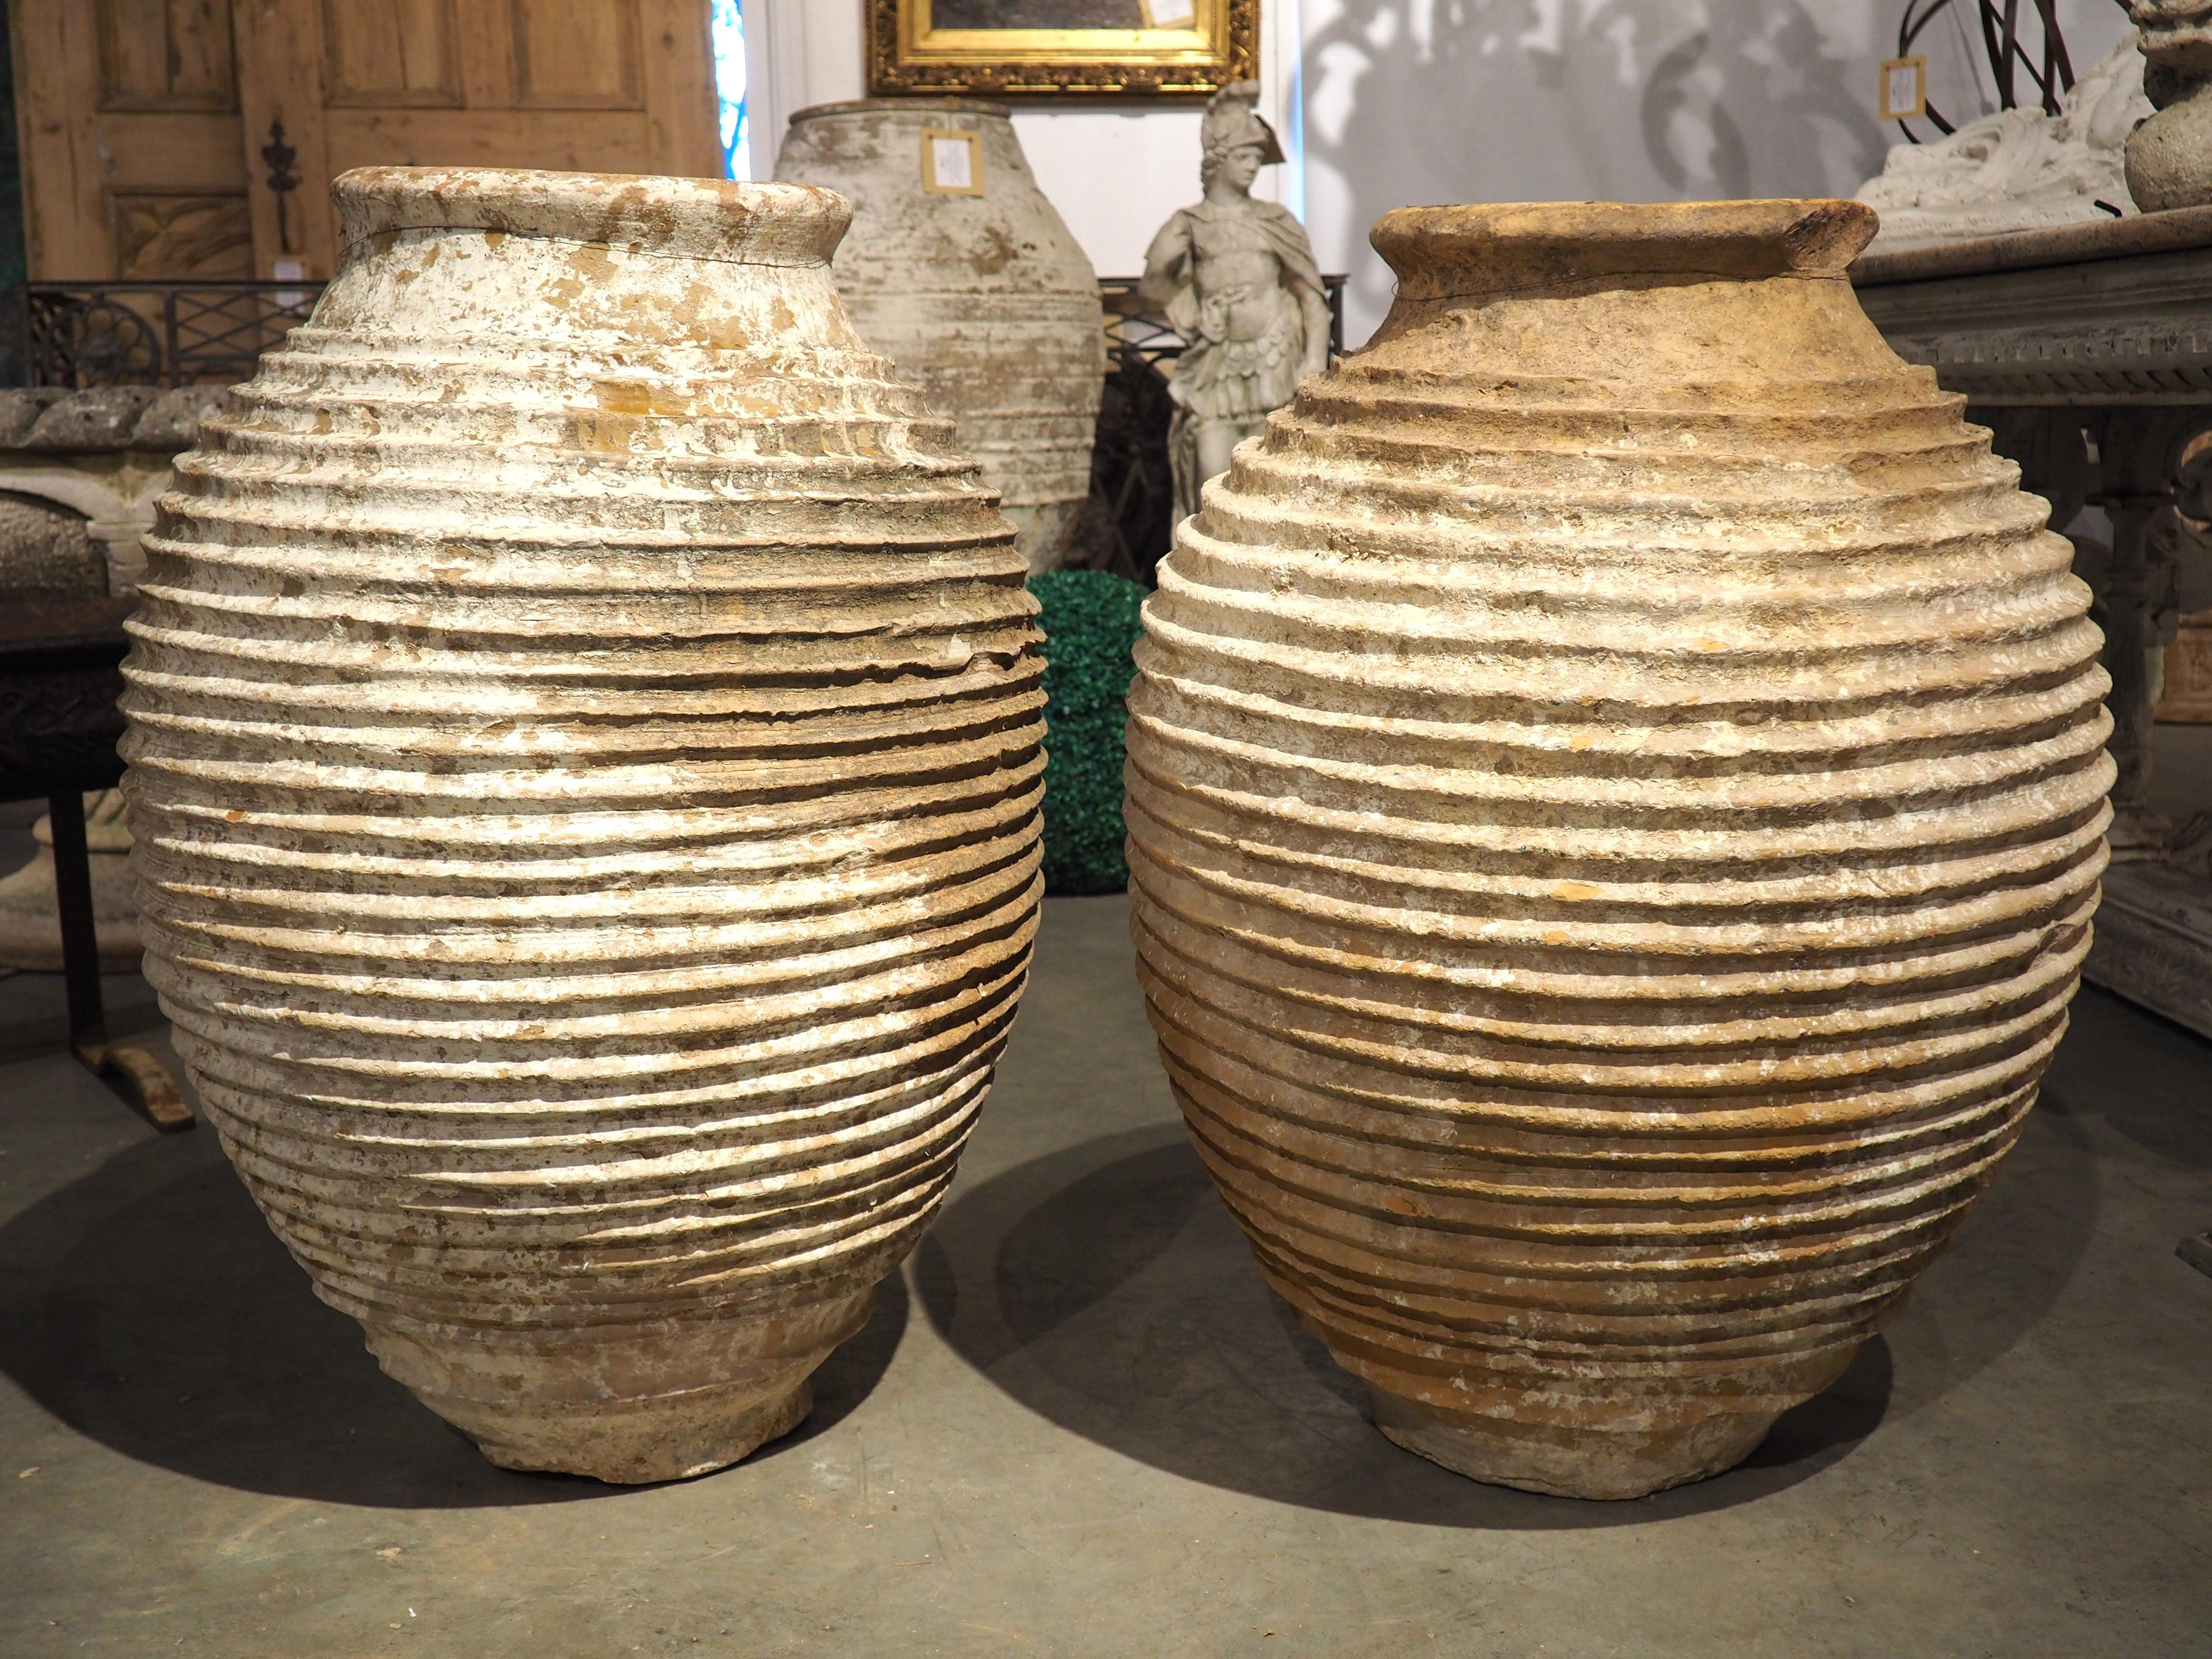 Pair of Large Antique Greek Olive Oil Jars from the Peloponnese Region, 19th C. For Sale 9